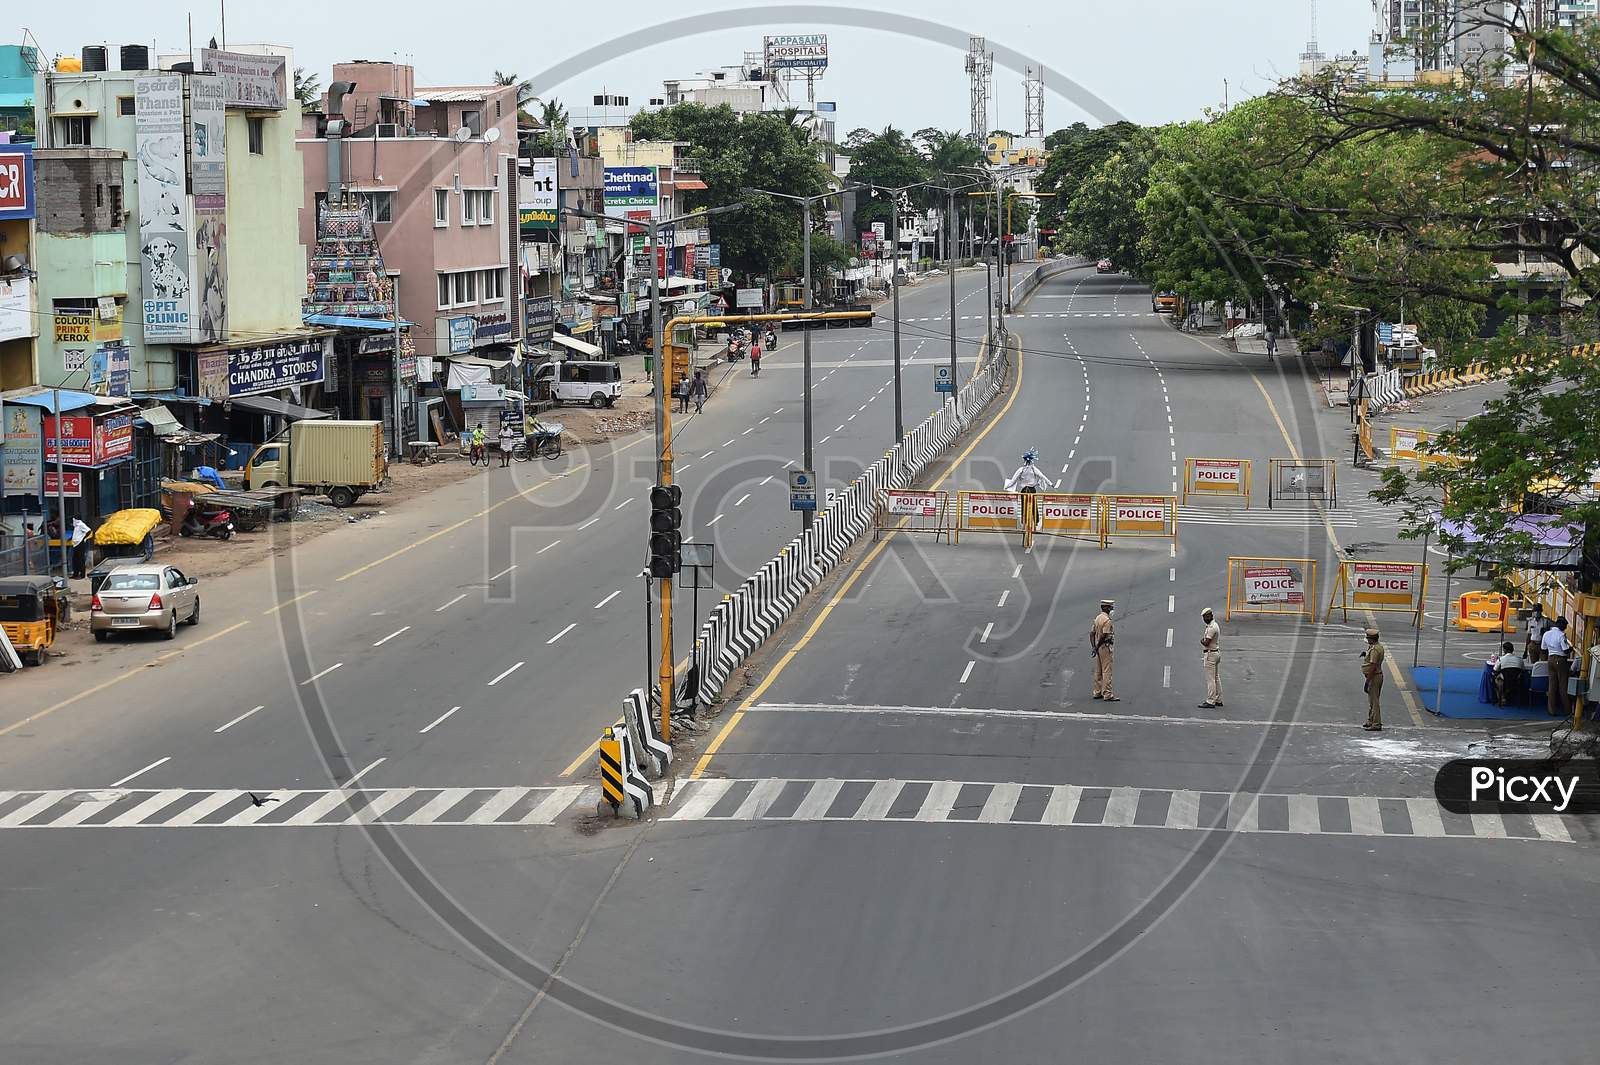 Police place barricades on a deserted road during the lockdown in Chennai on July 07, 2020